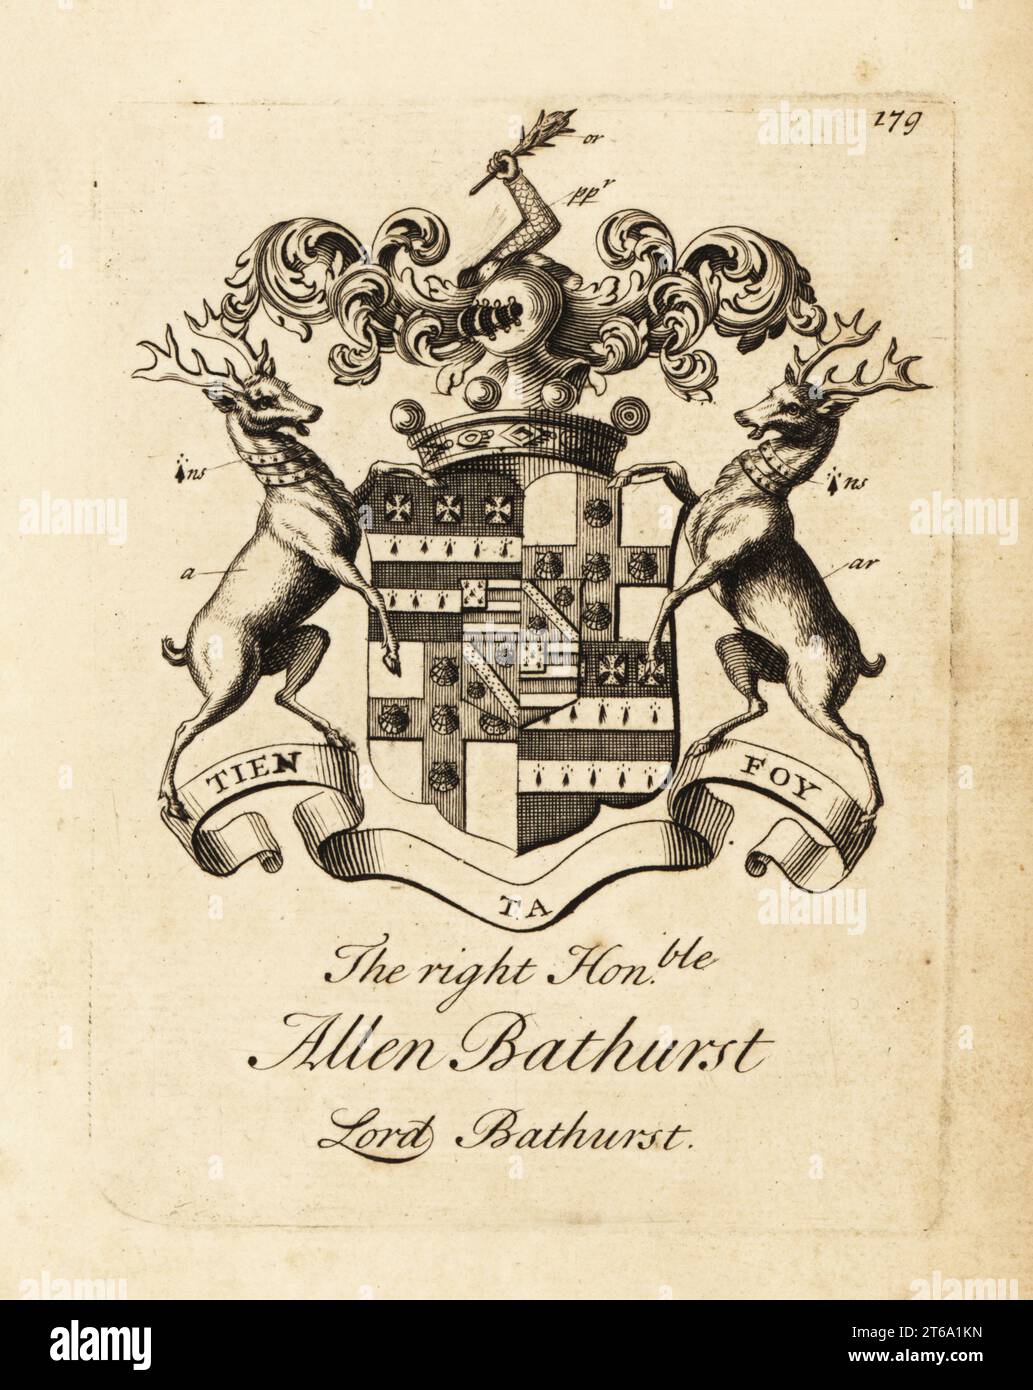 Coat of arms of the Right Honourable Allen Bathurst, Lord Bathurst, 1st Earl Bathurst, 1684-1775. Copperplate engraving by Andrew Johnston after C. Gardiner from Notitia Anglicana, Shewing the Achievements of all the English Nobility, Andrew Johnson, the Strand, London, 1724. Stock Photo